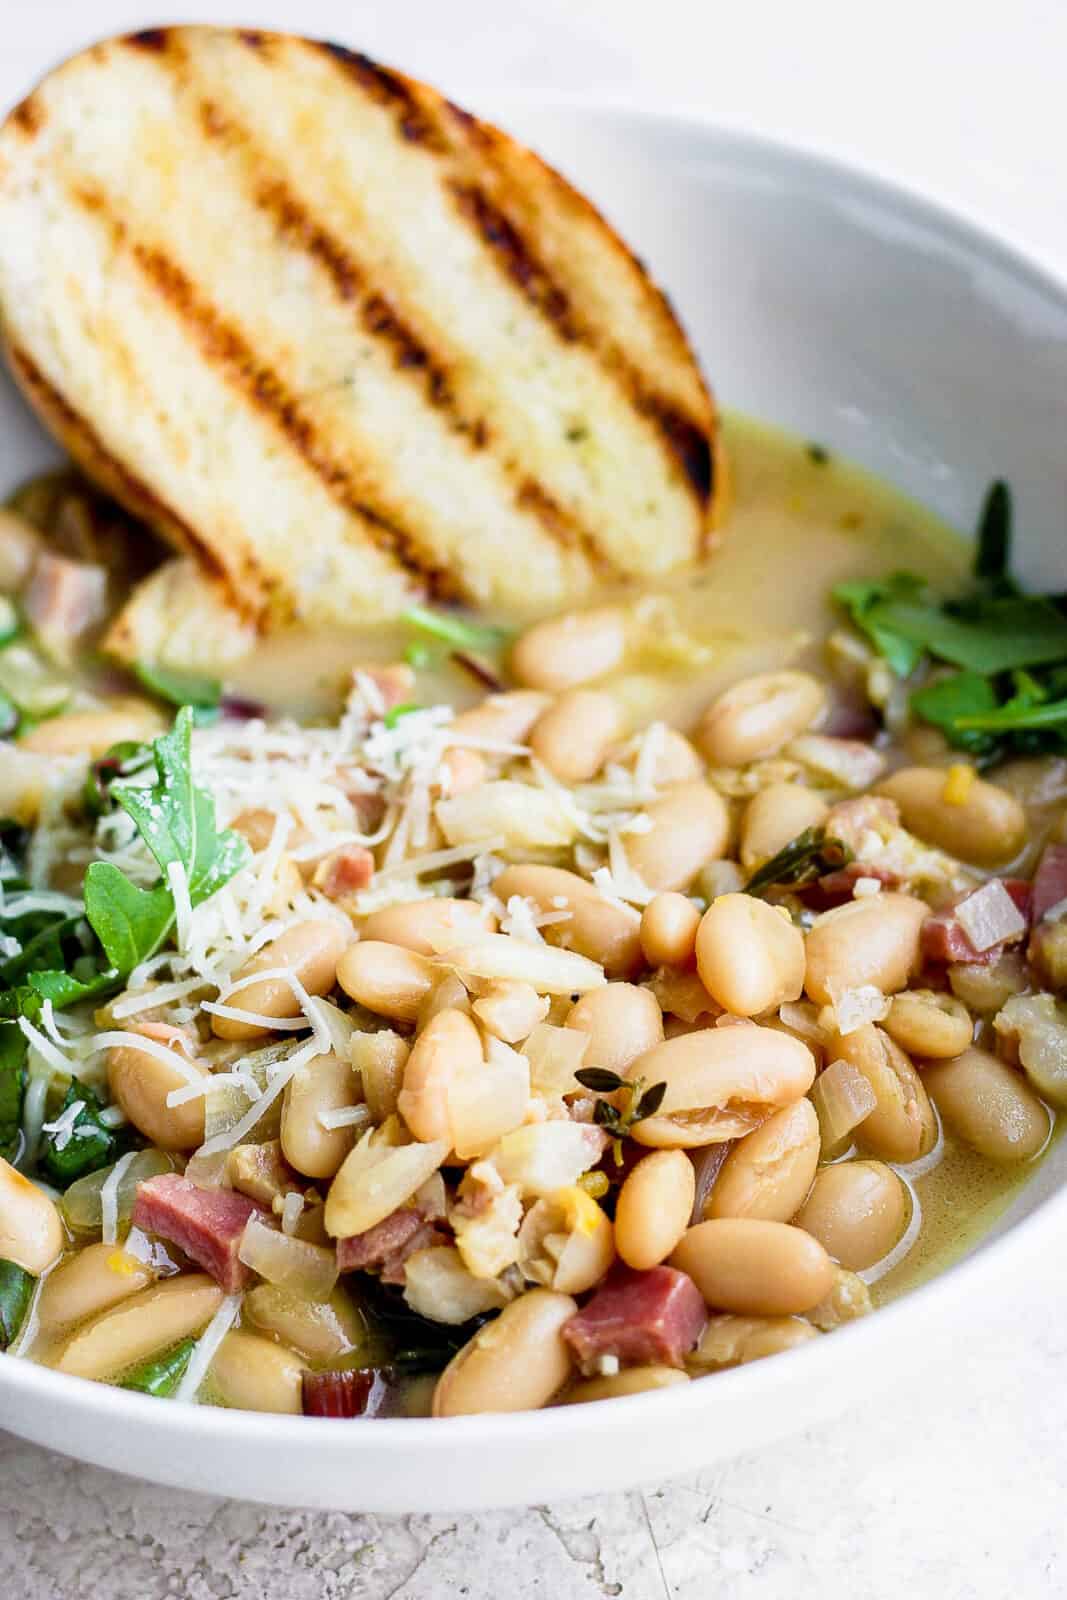 A bowl of brothy beans with grilled bread.